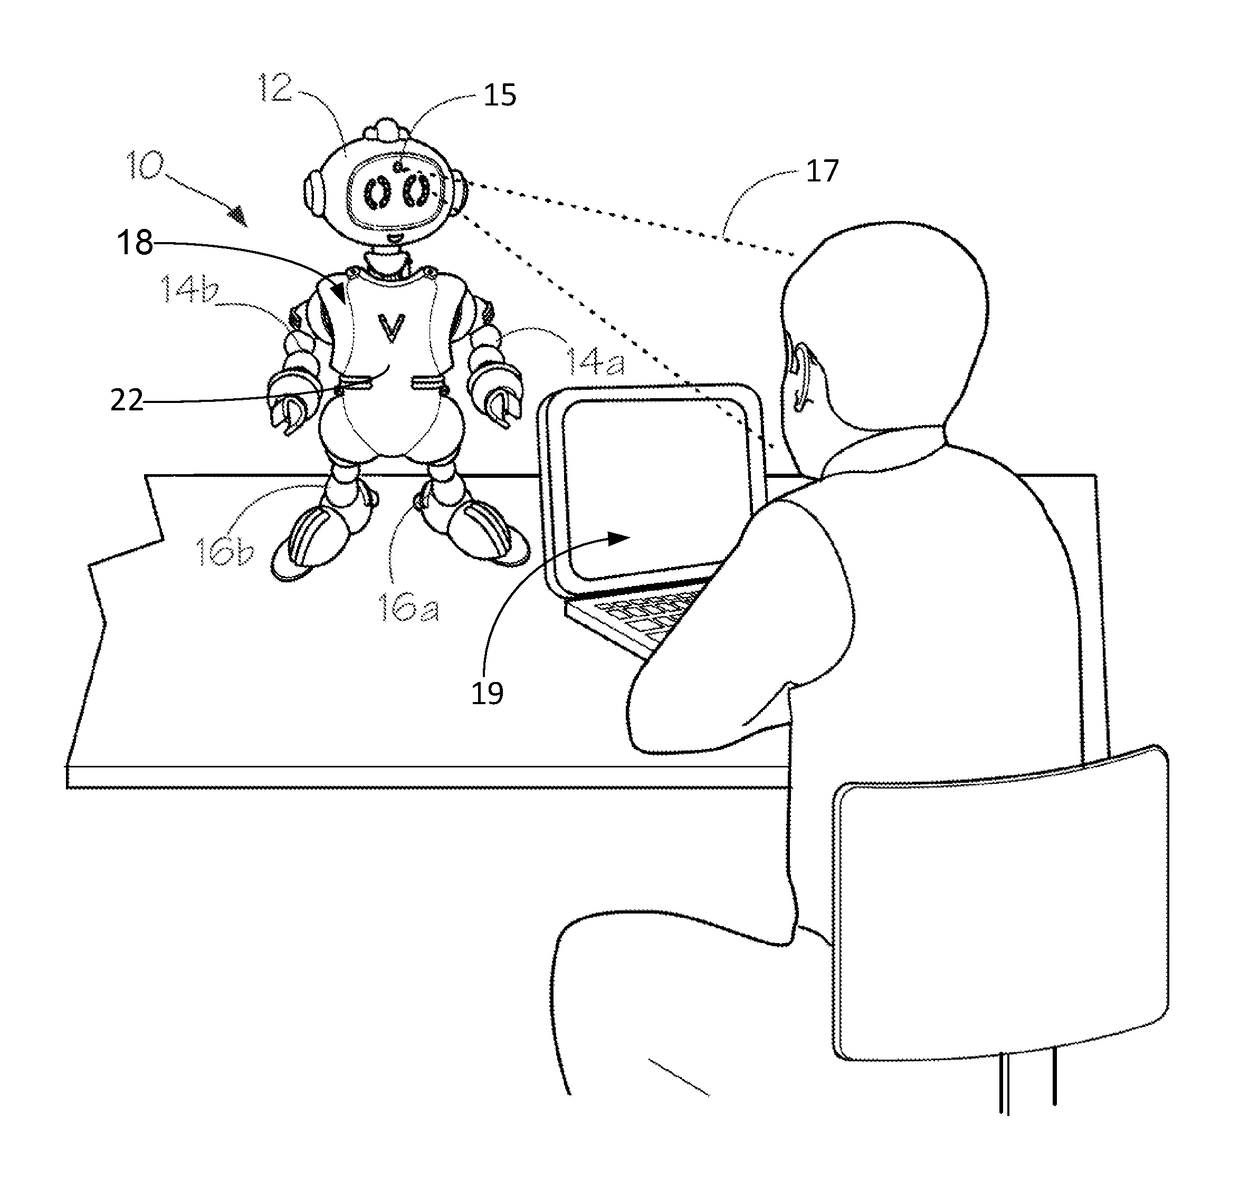 Interactive robot-augmented education system